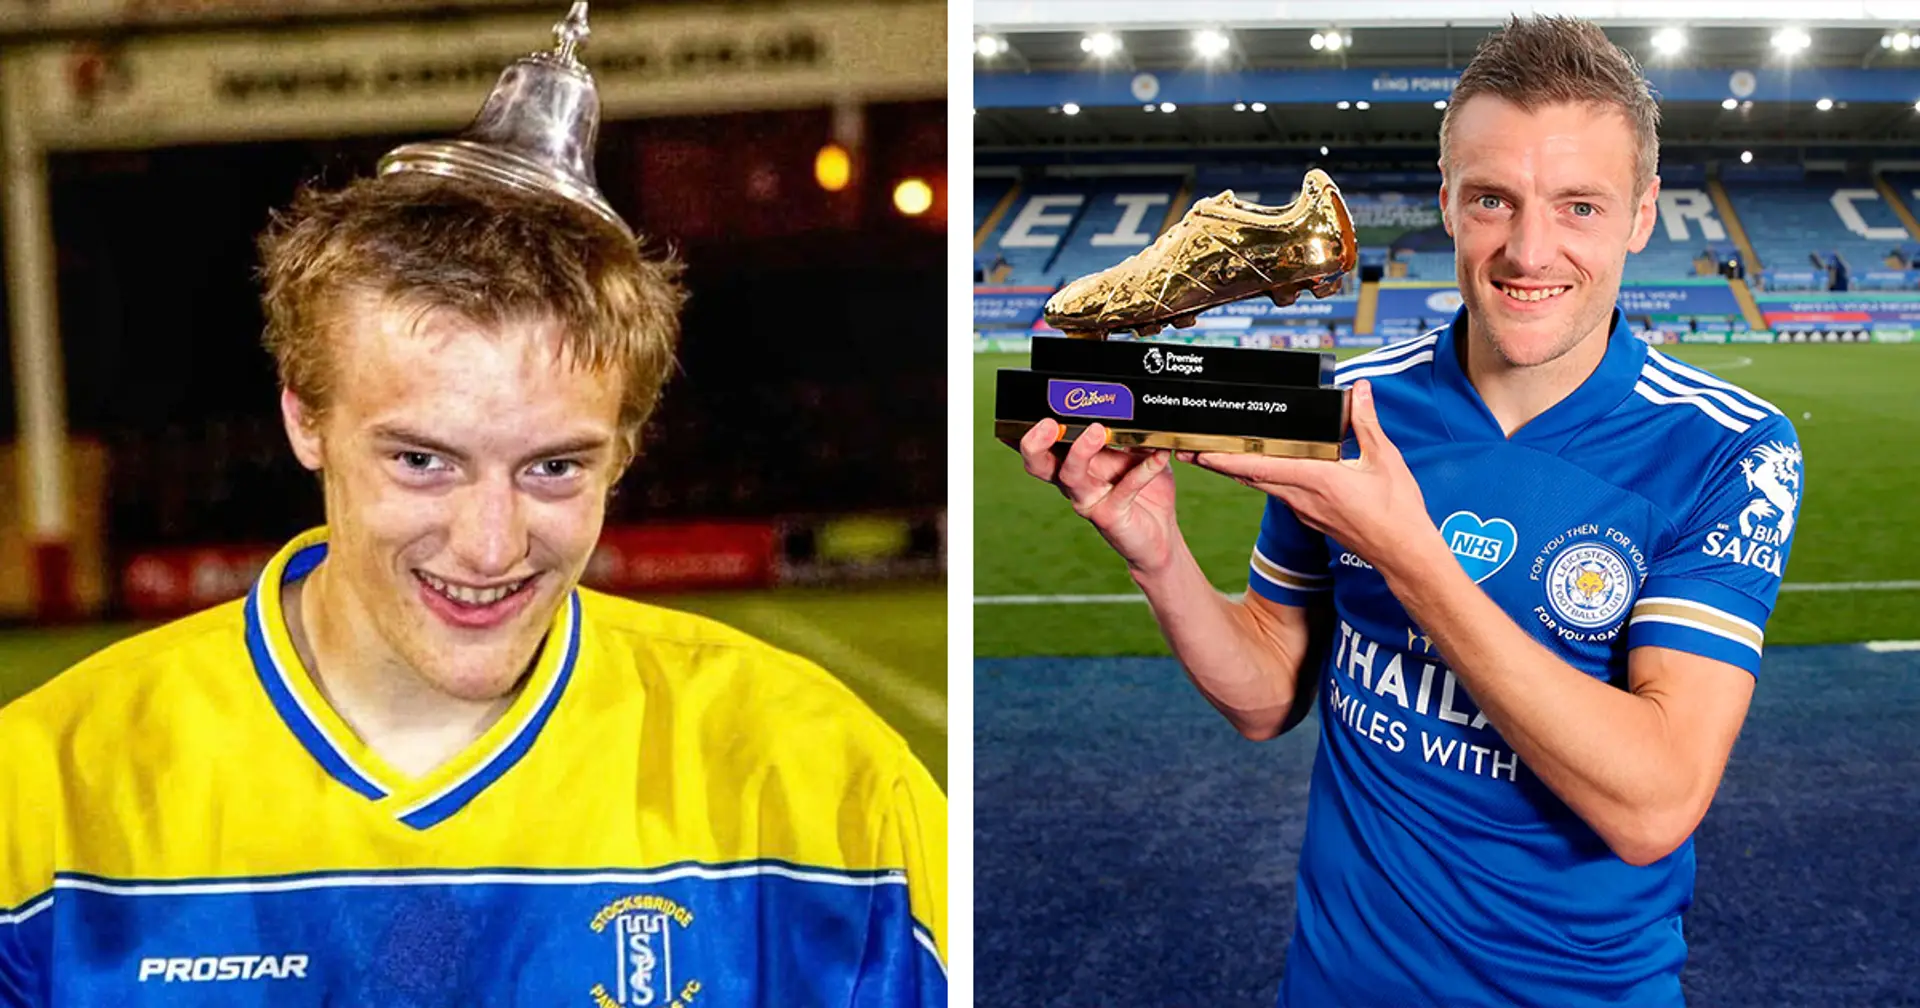 Jamie Vardy sends inspirational message after winning Golden Boot - 10 years ago he was earning £30 a week in 8th tier of English football